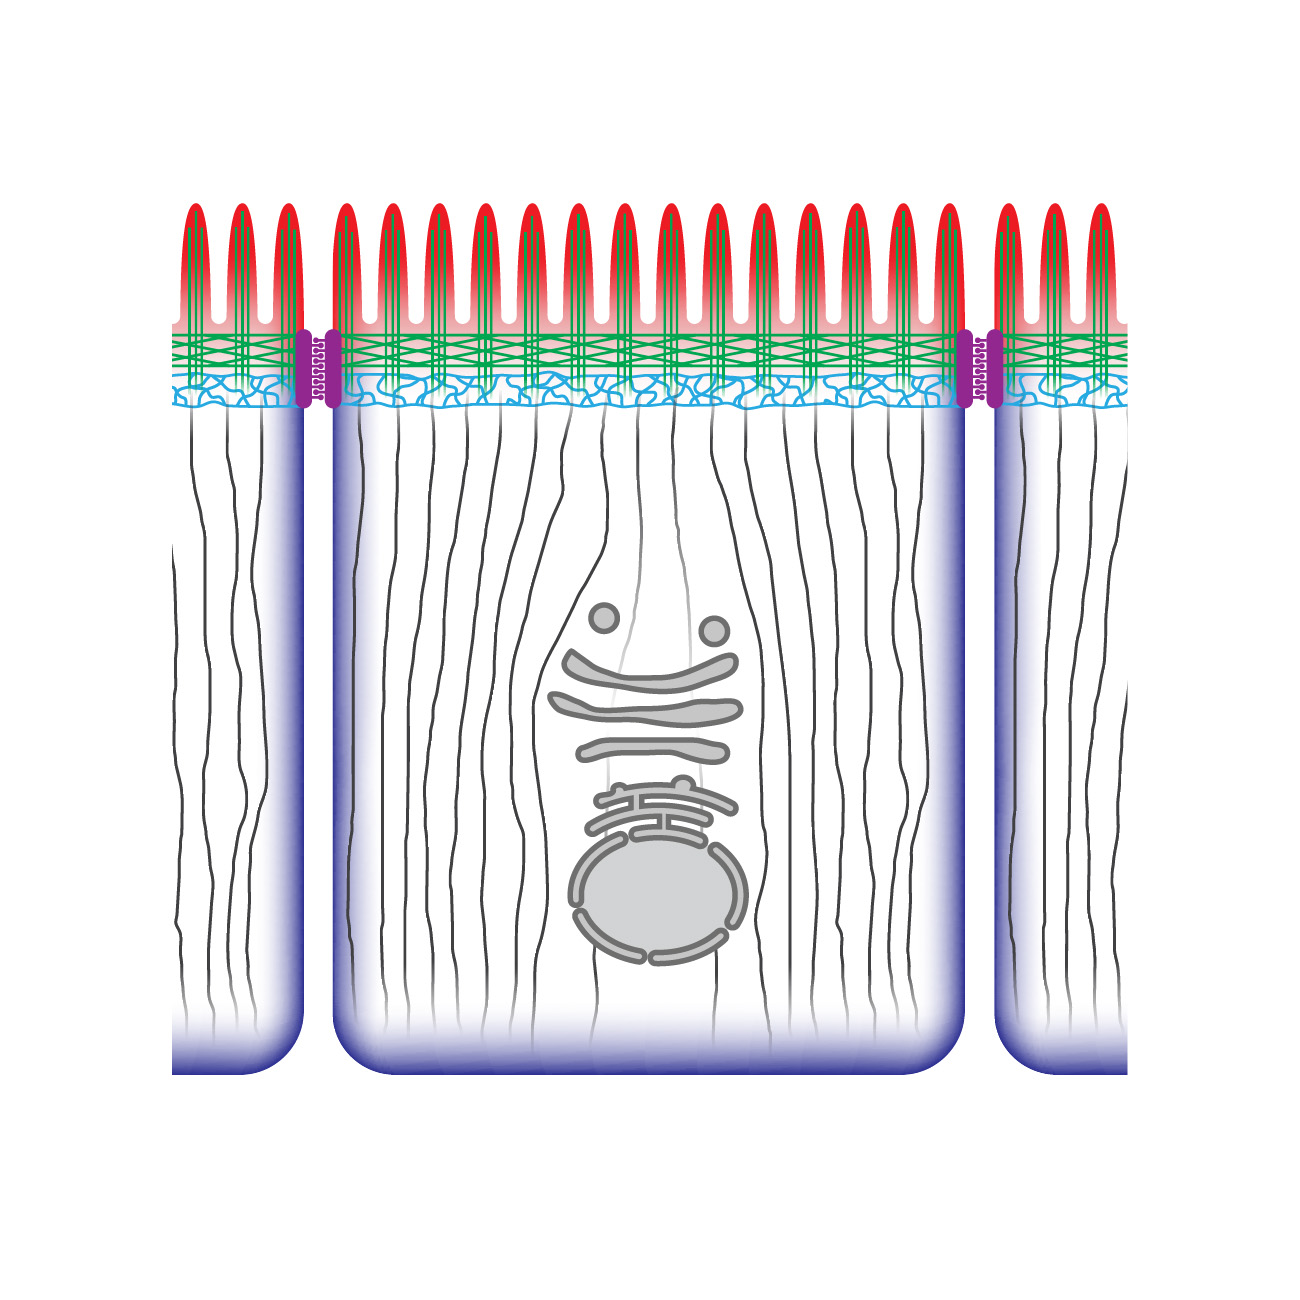 A drawing of an epithelial cell